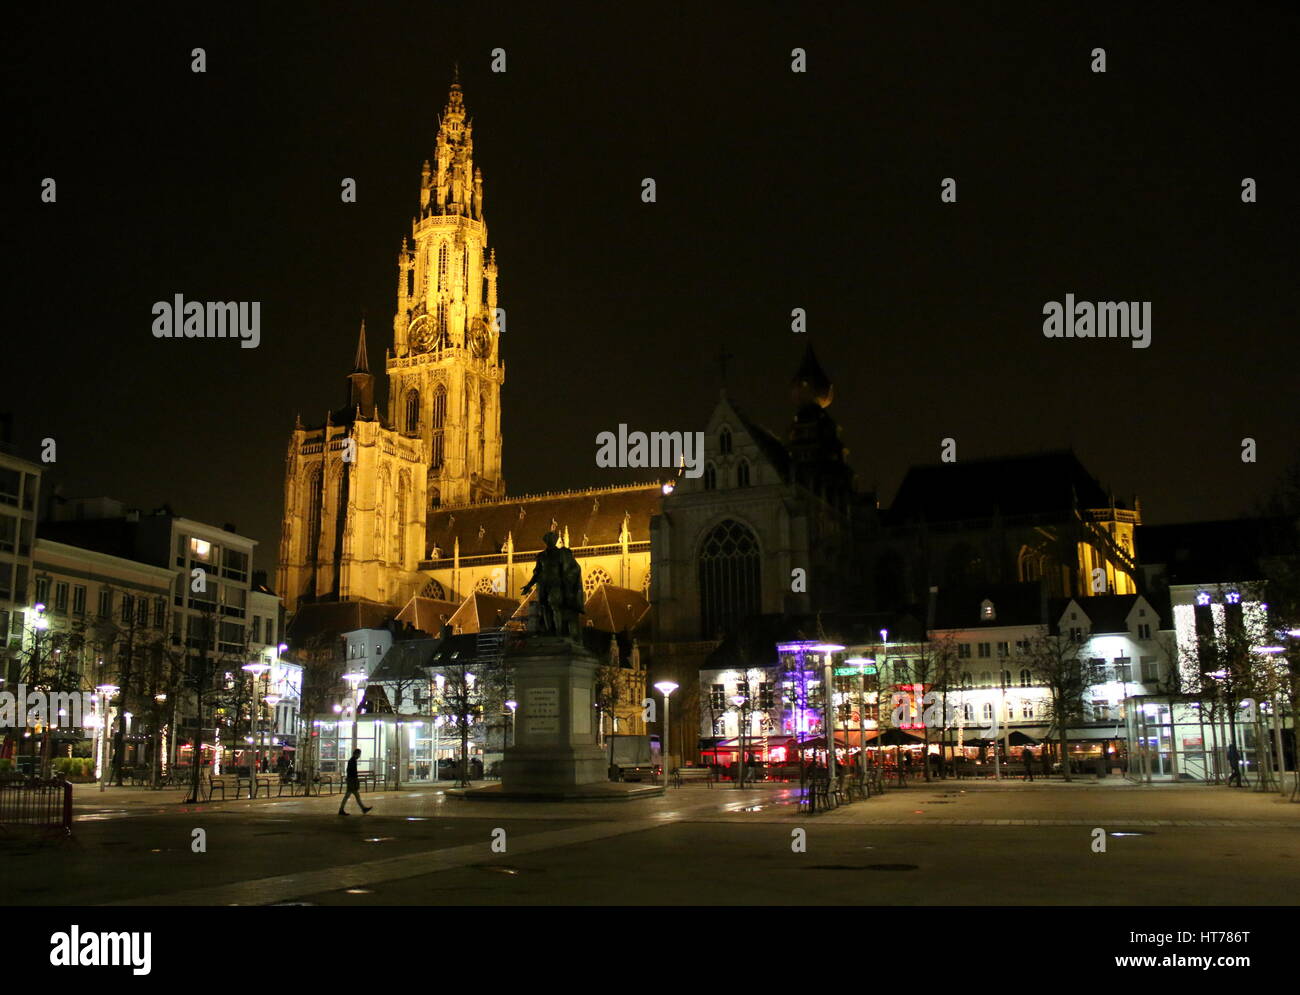 Cathedral of our Lady (Onze-lieve-vrouwekathedraal) seen from Groenplaats square, Antwerp, Belgium Stock Photo